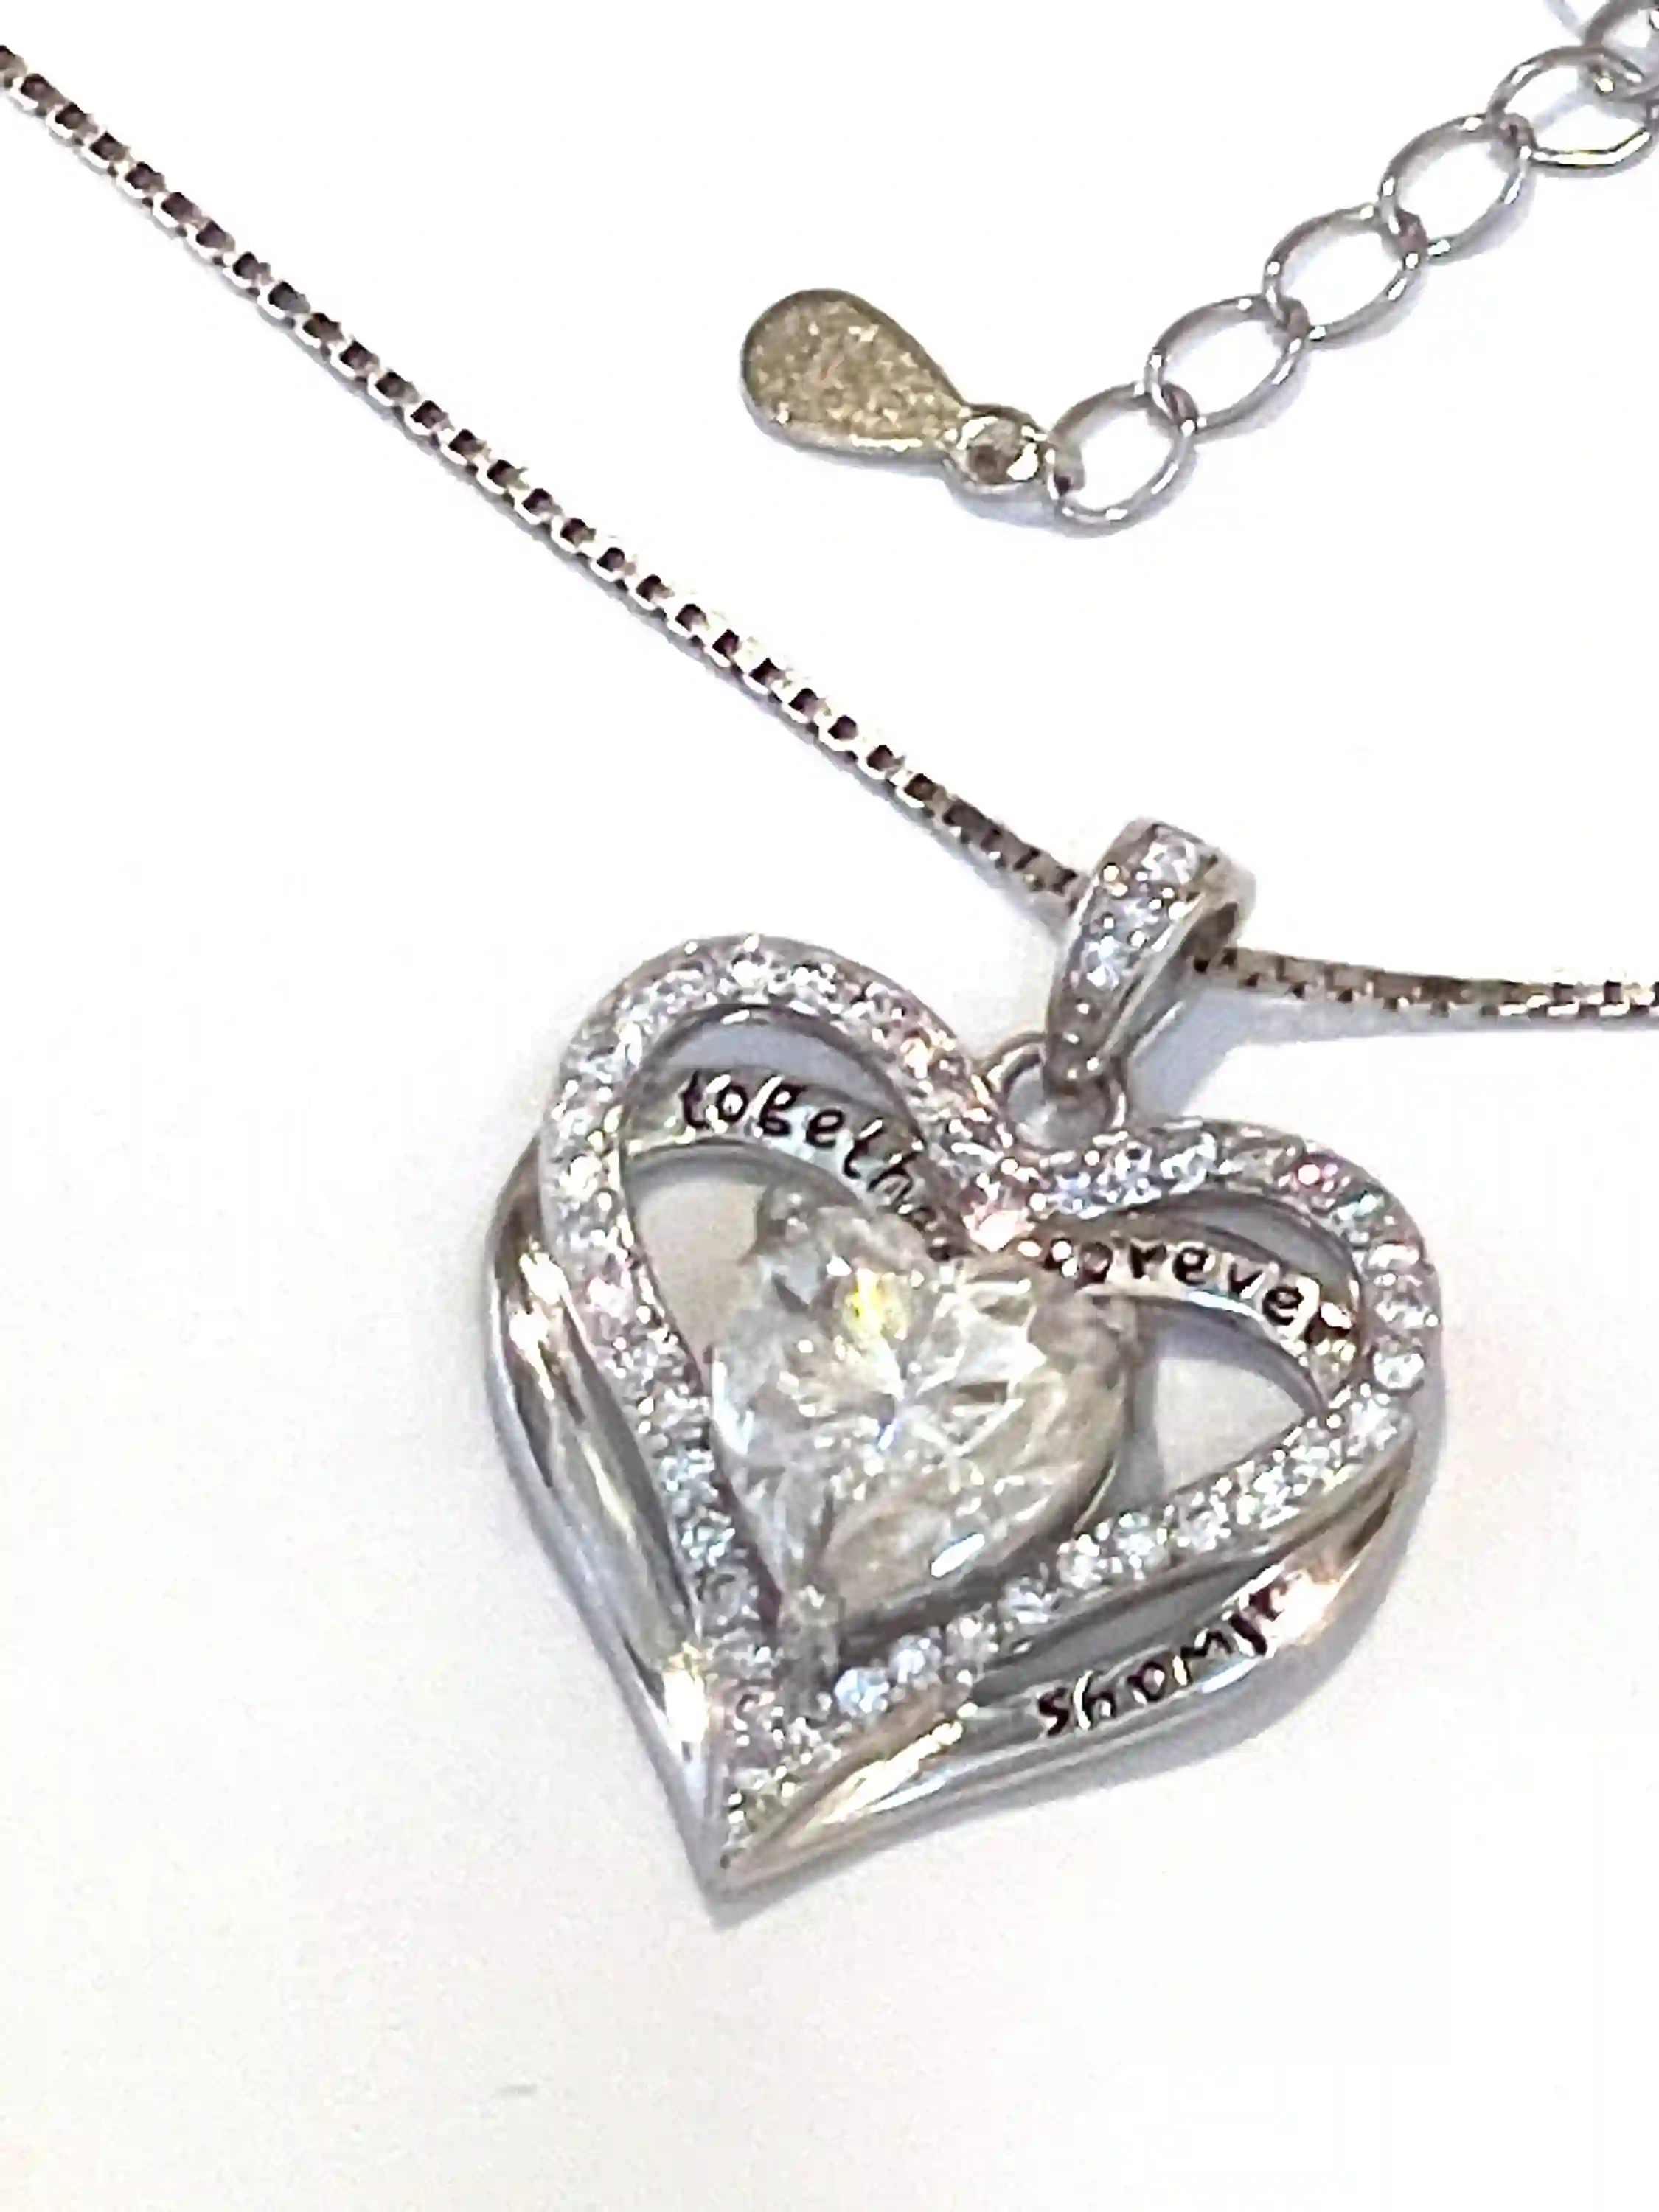 3 carats of Diamonds Heart Shaped Pendant Heart Necklace Solid Sterling Silver 925 Platinum White Gold Anniversary Together Forever Jewelry 